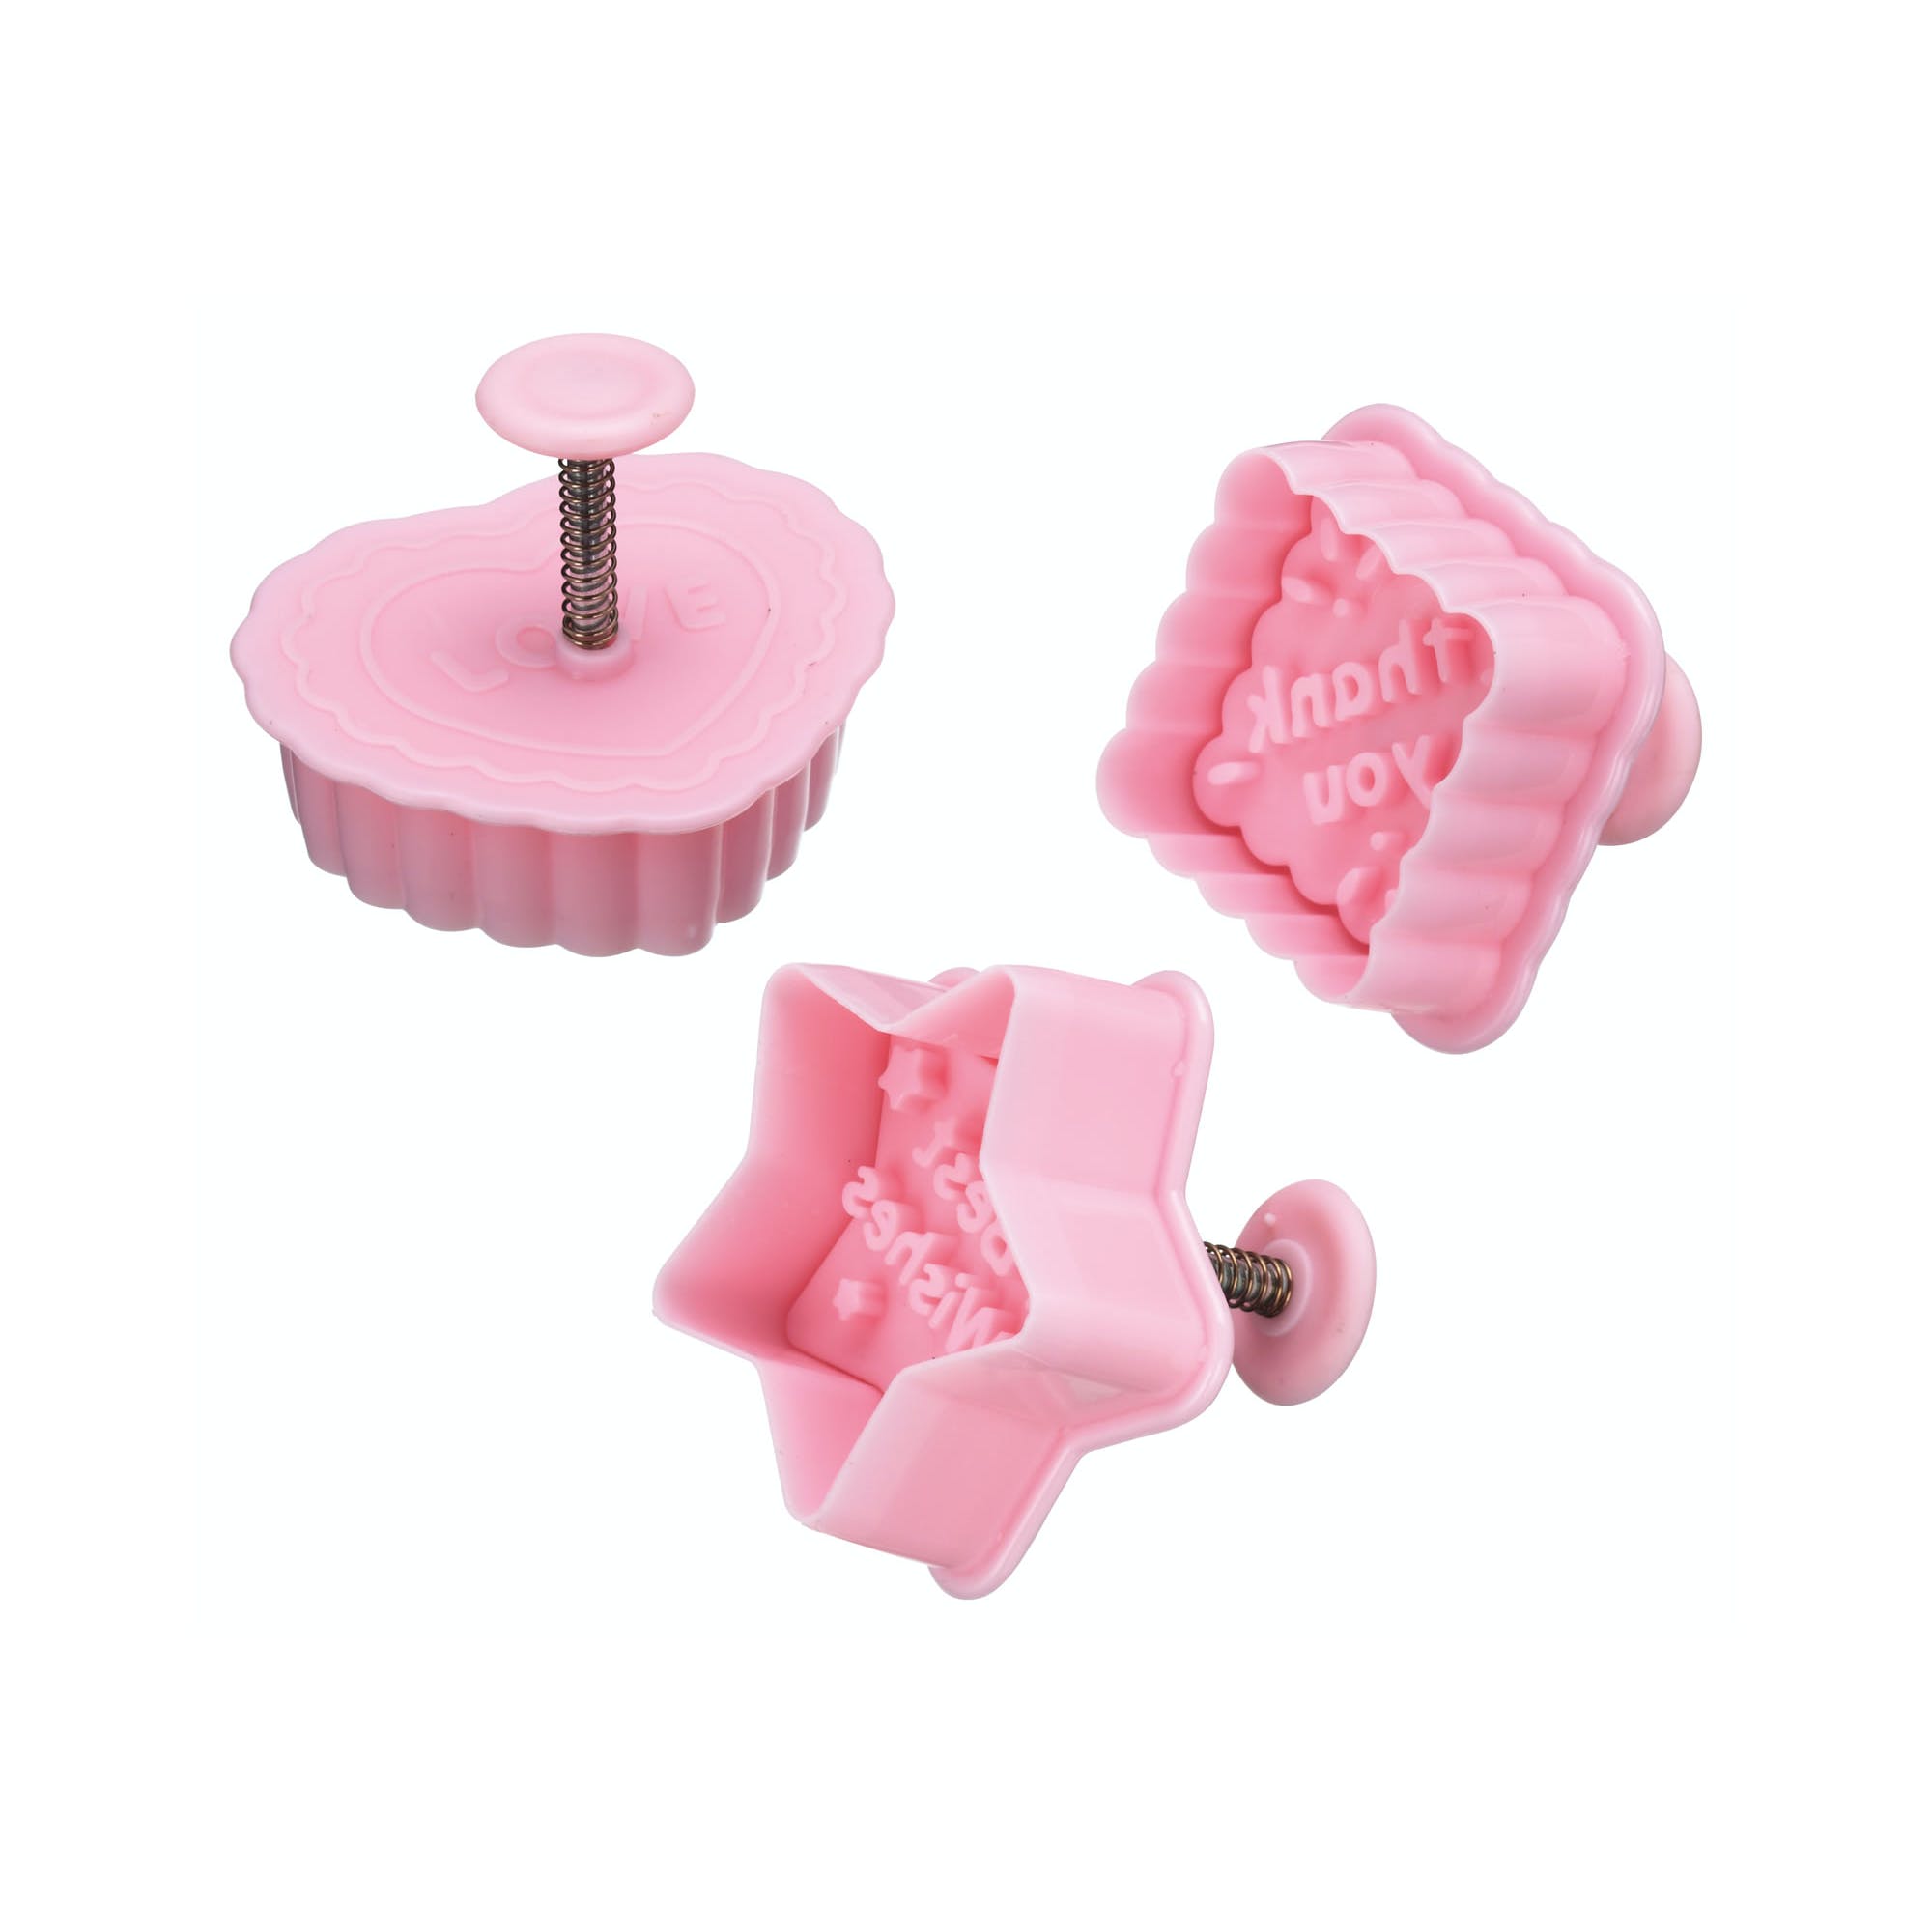 Sweetly Does It Message Plunger Cutters - The Cooks Cupboard Ltd